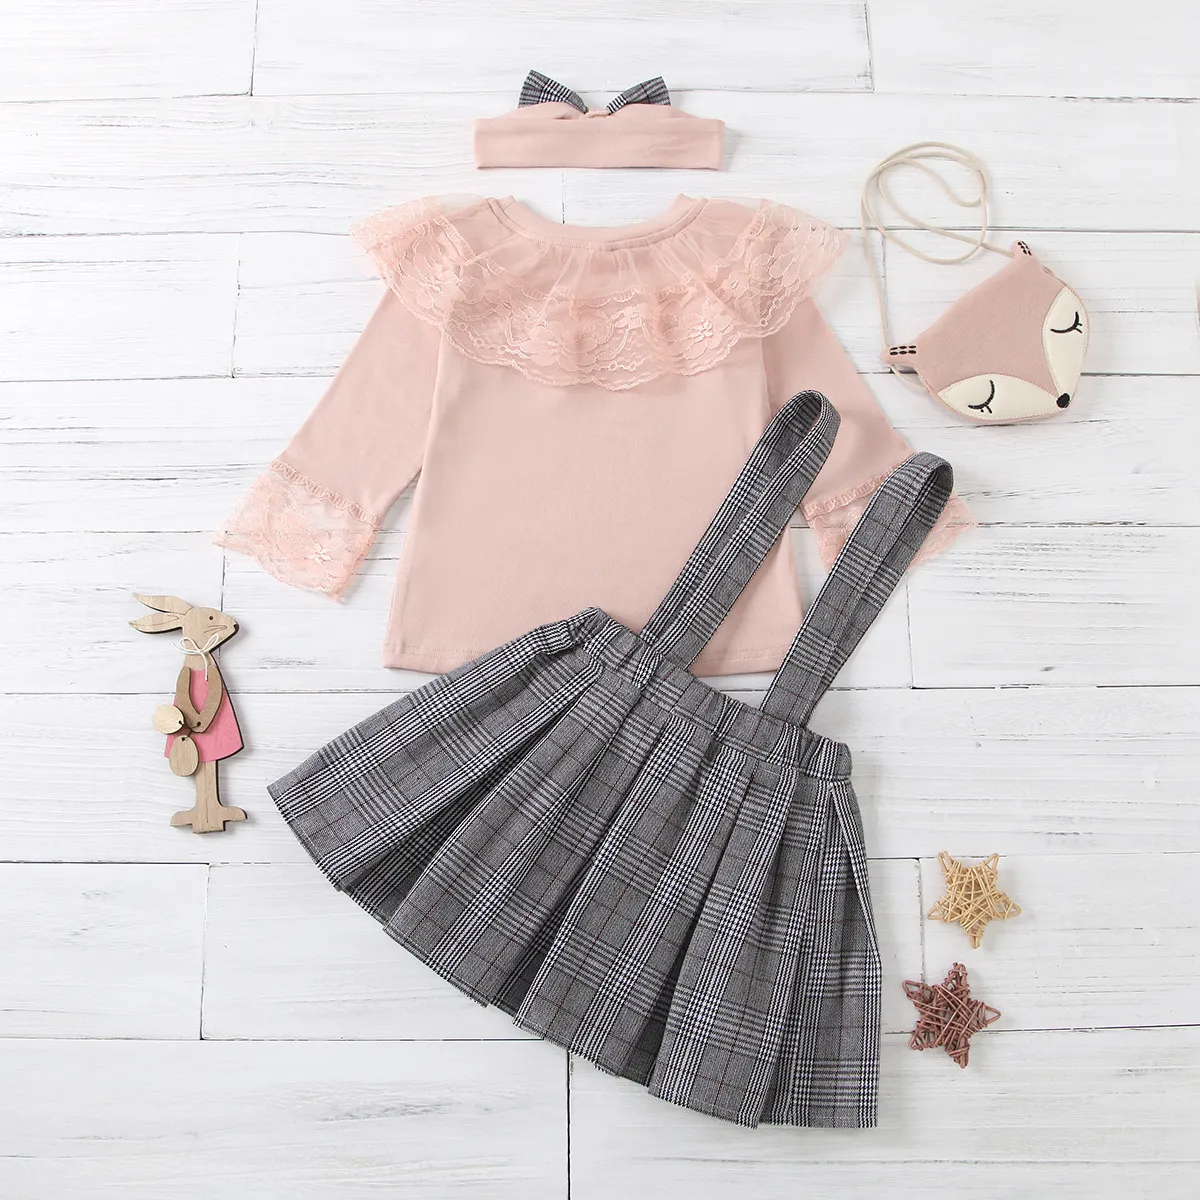 3-piece Baby / Toddler Lace Top and Bow Plaid Strap Skirt Set Pink big image 1